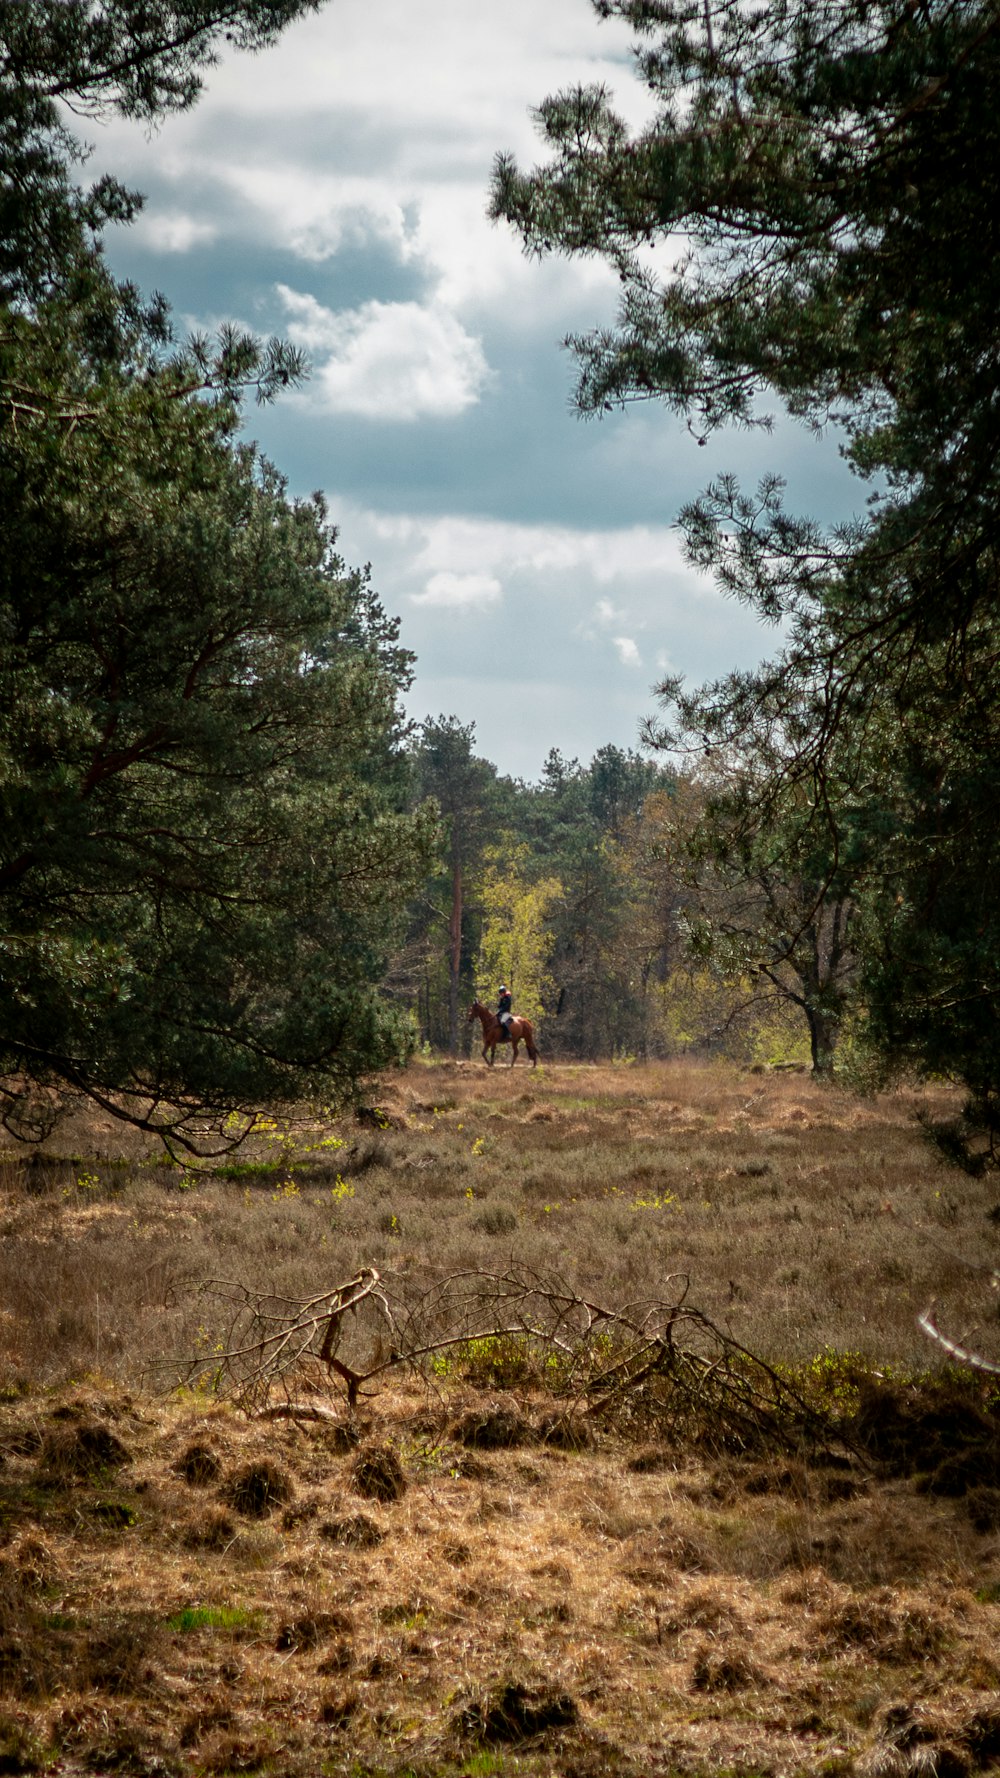 a couple of people riding horses through a forest